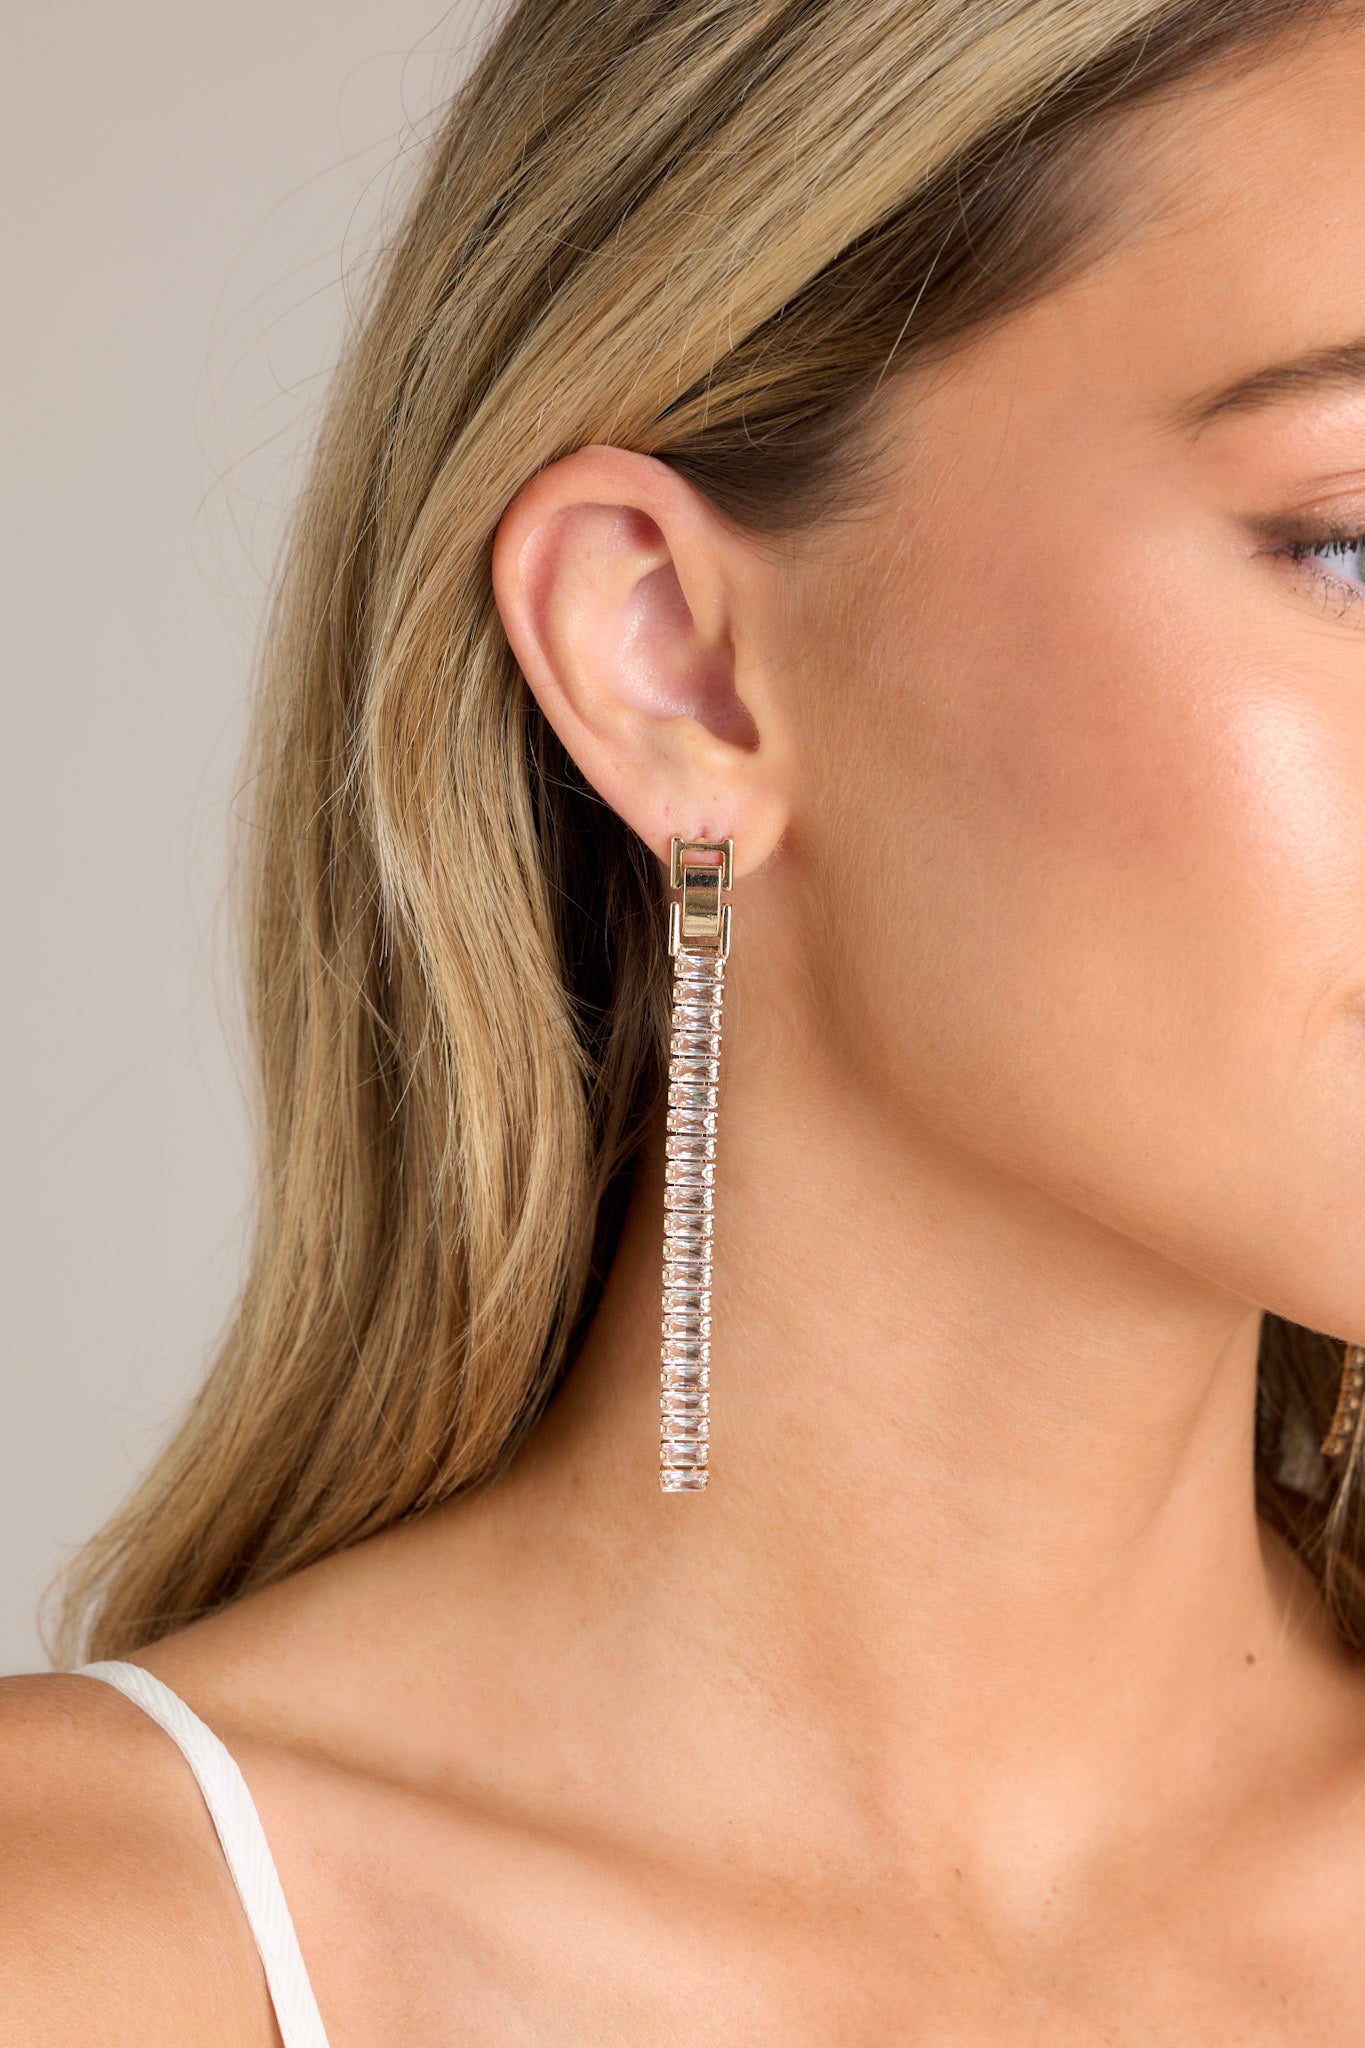 These earrings feature a stud in the style of a fold-over clasp, linked rectangular rhinestone dangles, and a secured post backing.